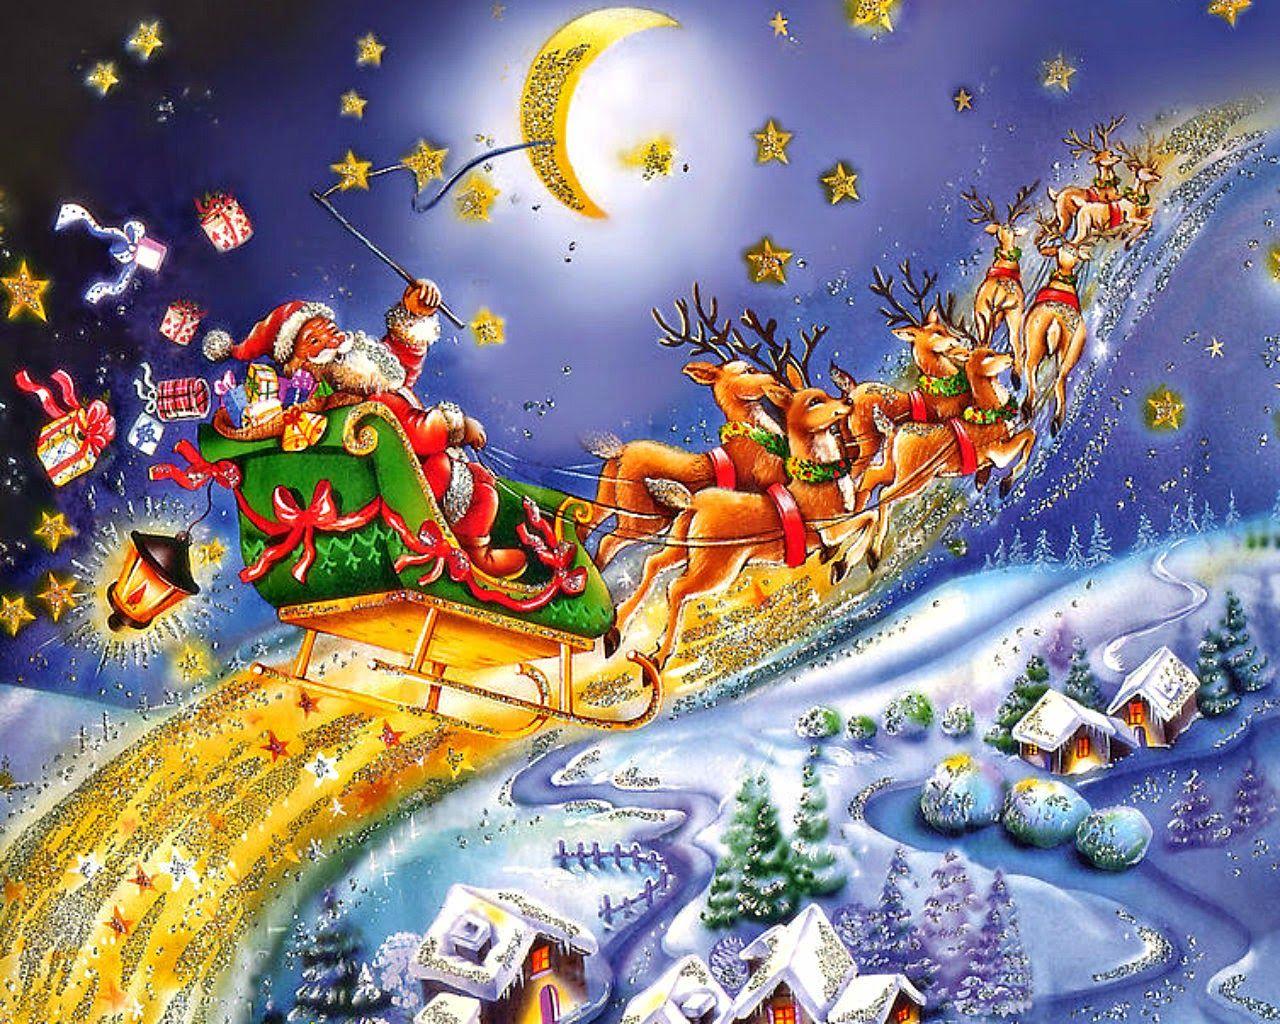 Santa Claus coming to town riding his reindeer sleigh flying in sky